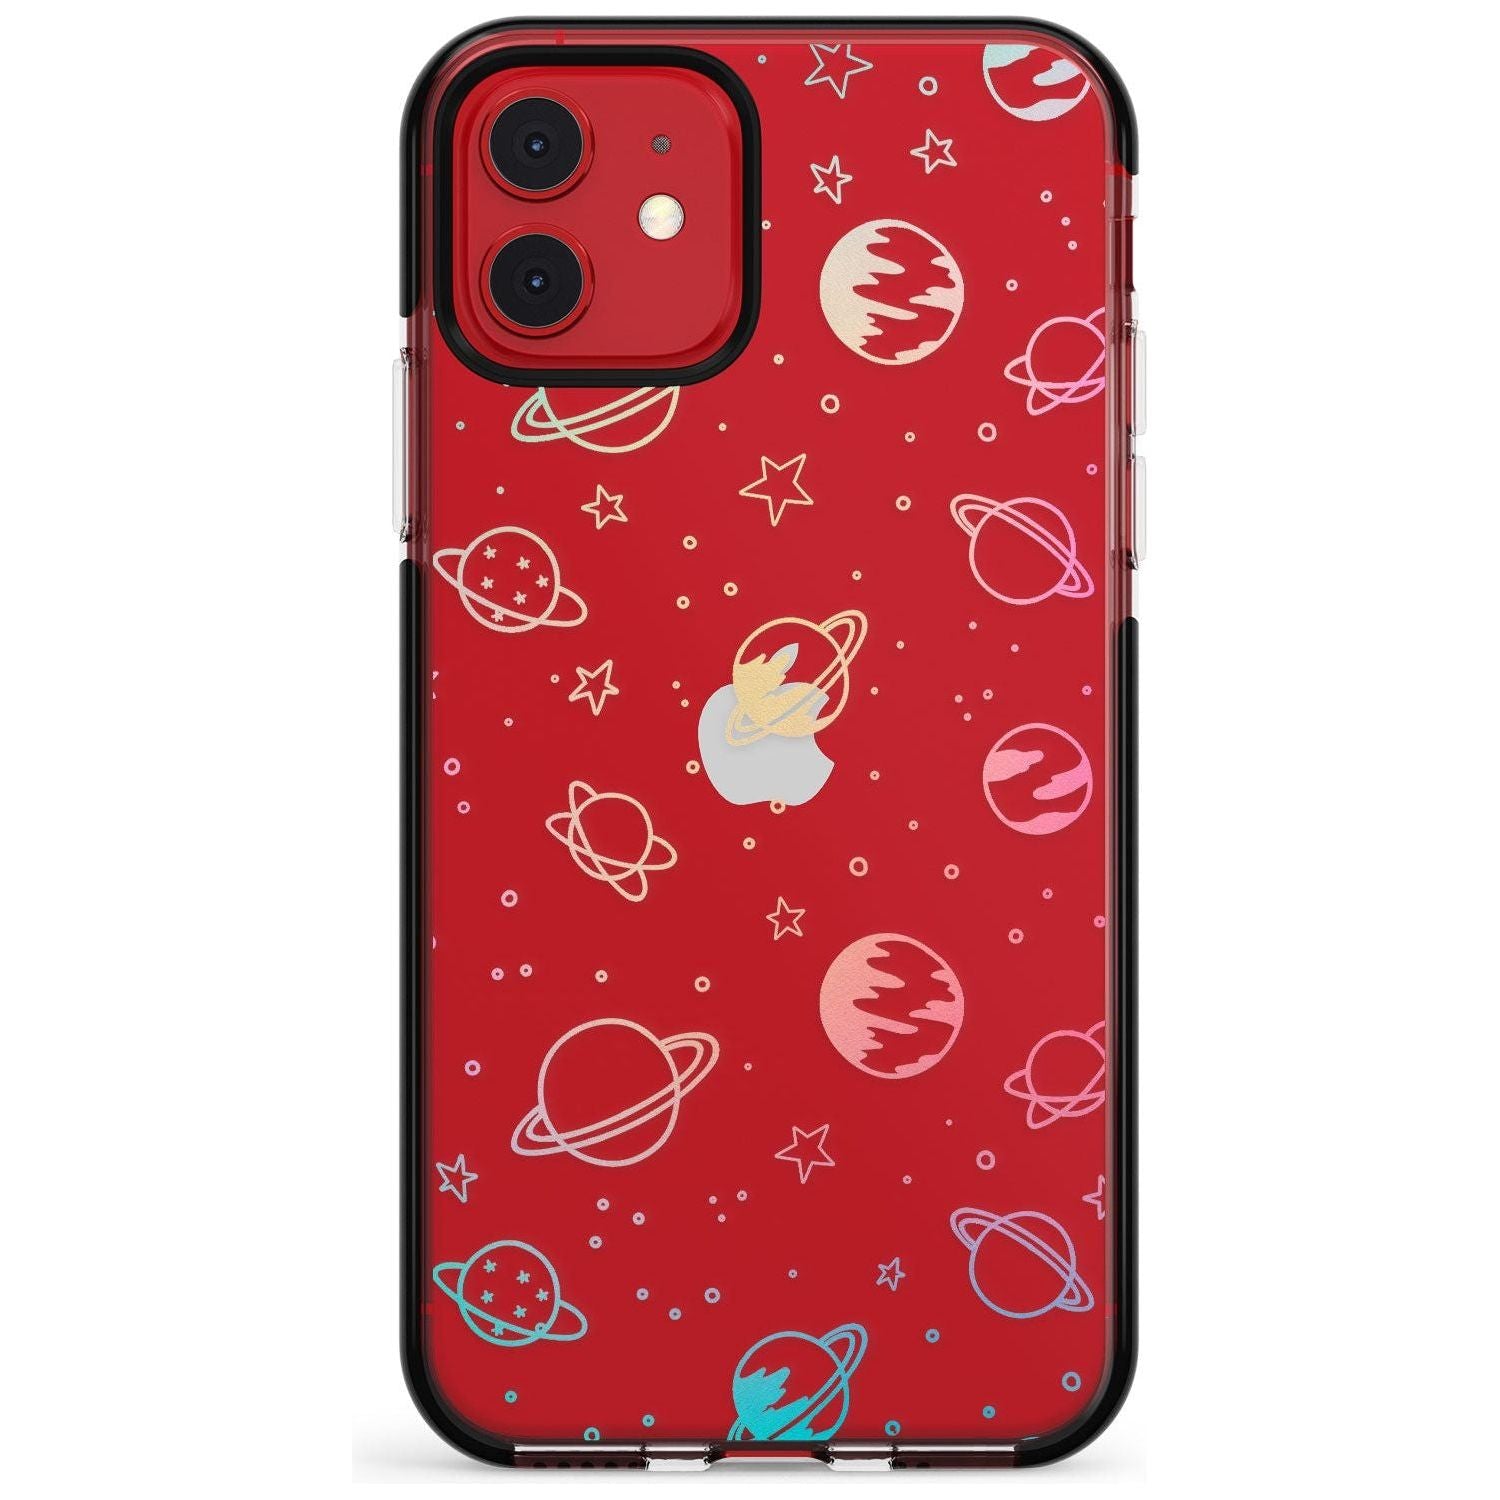 Outer Space Outlines: Pastels on Clear Pink Fade Impact Phone Case for iPhone 11 Pro Max